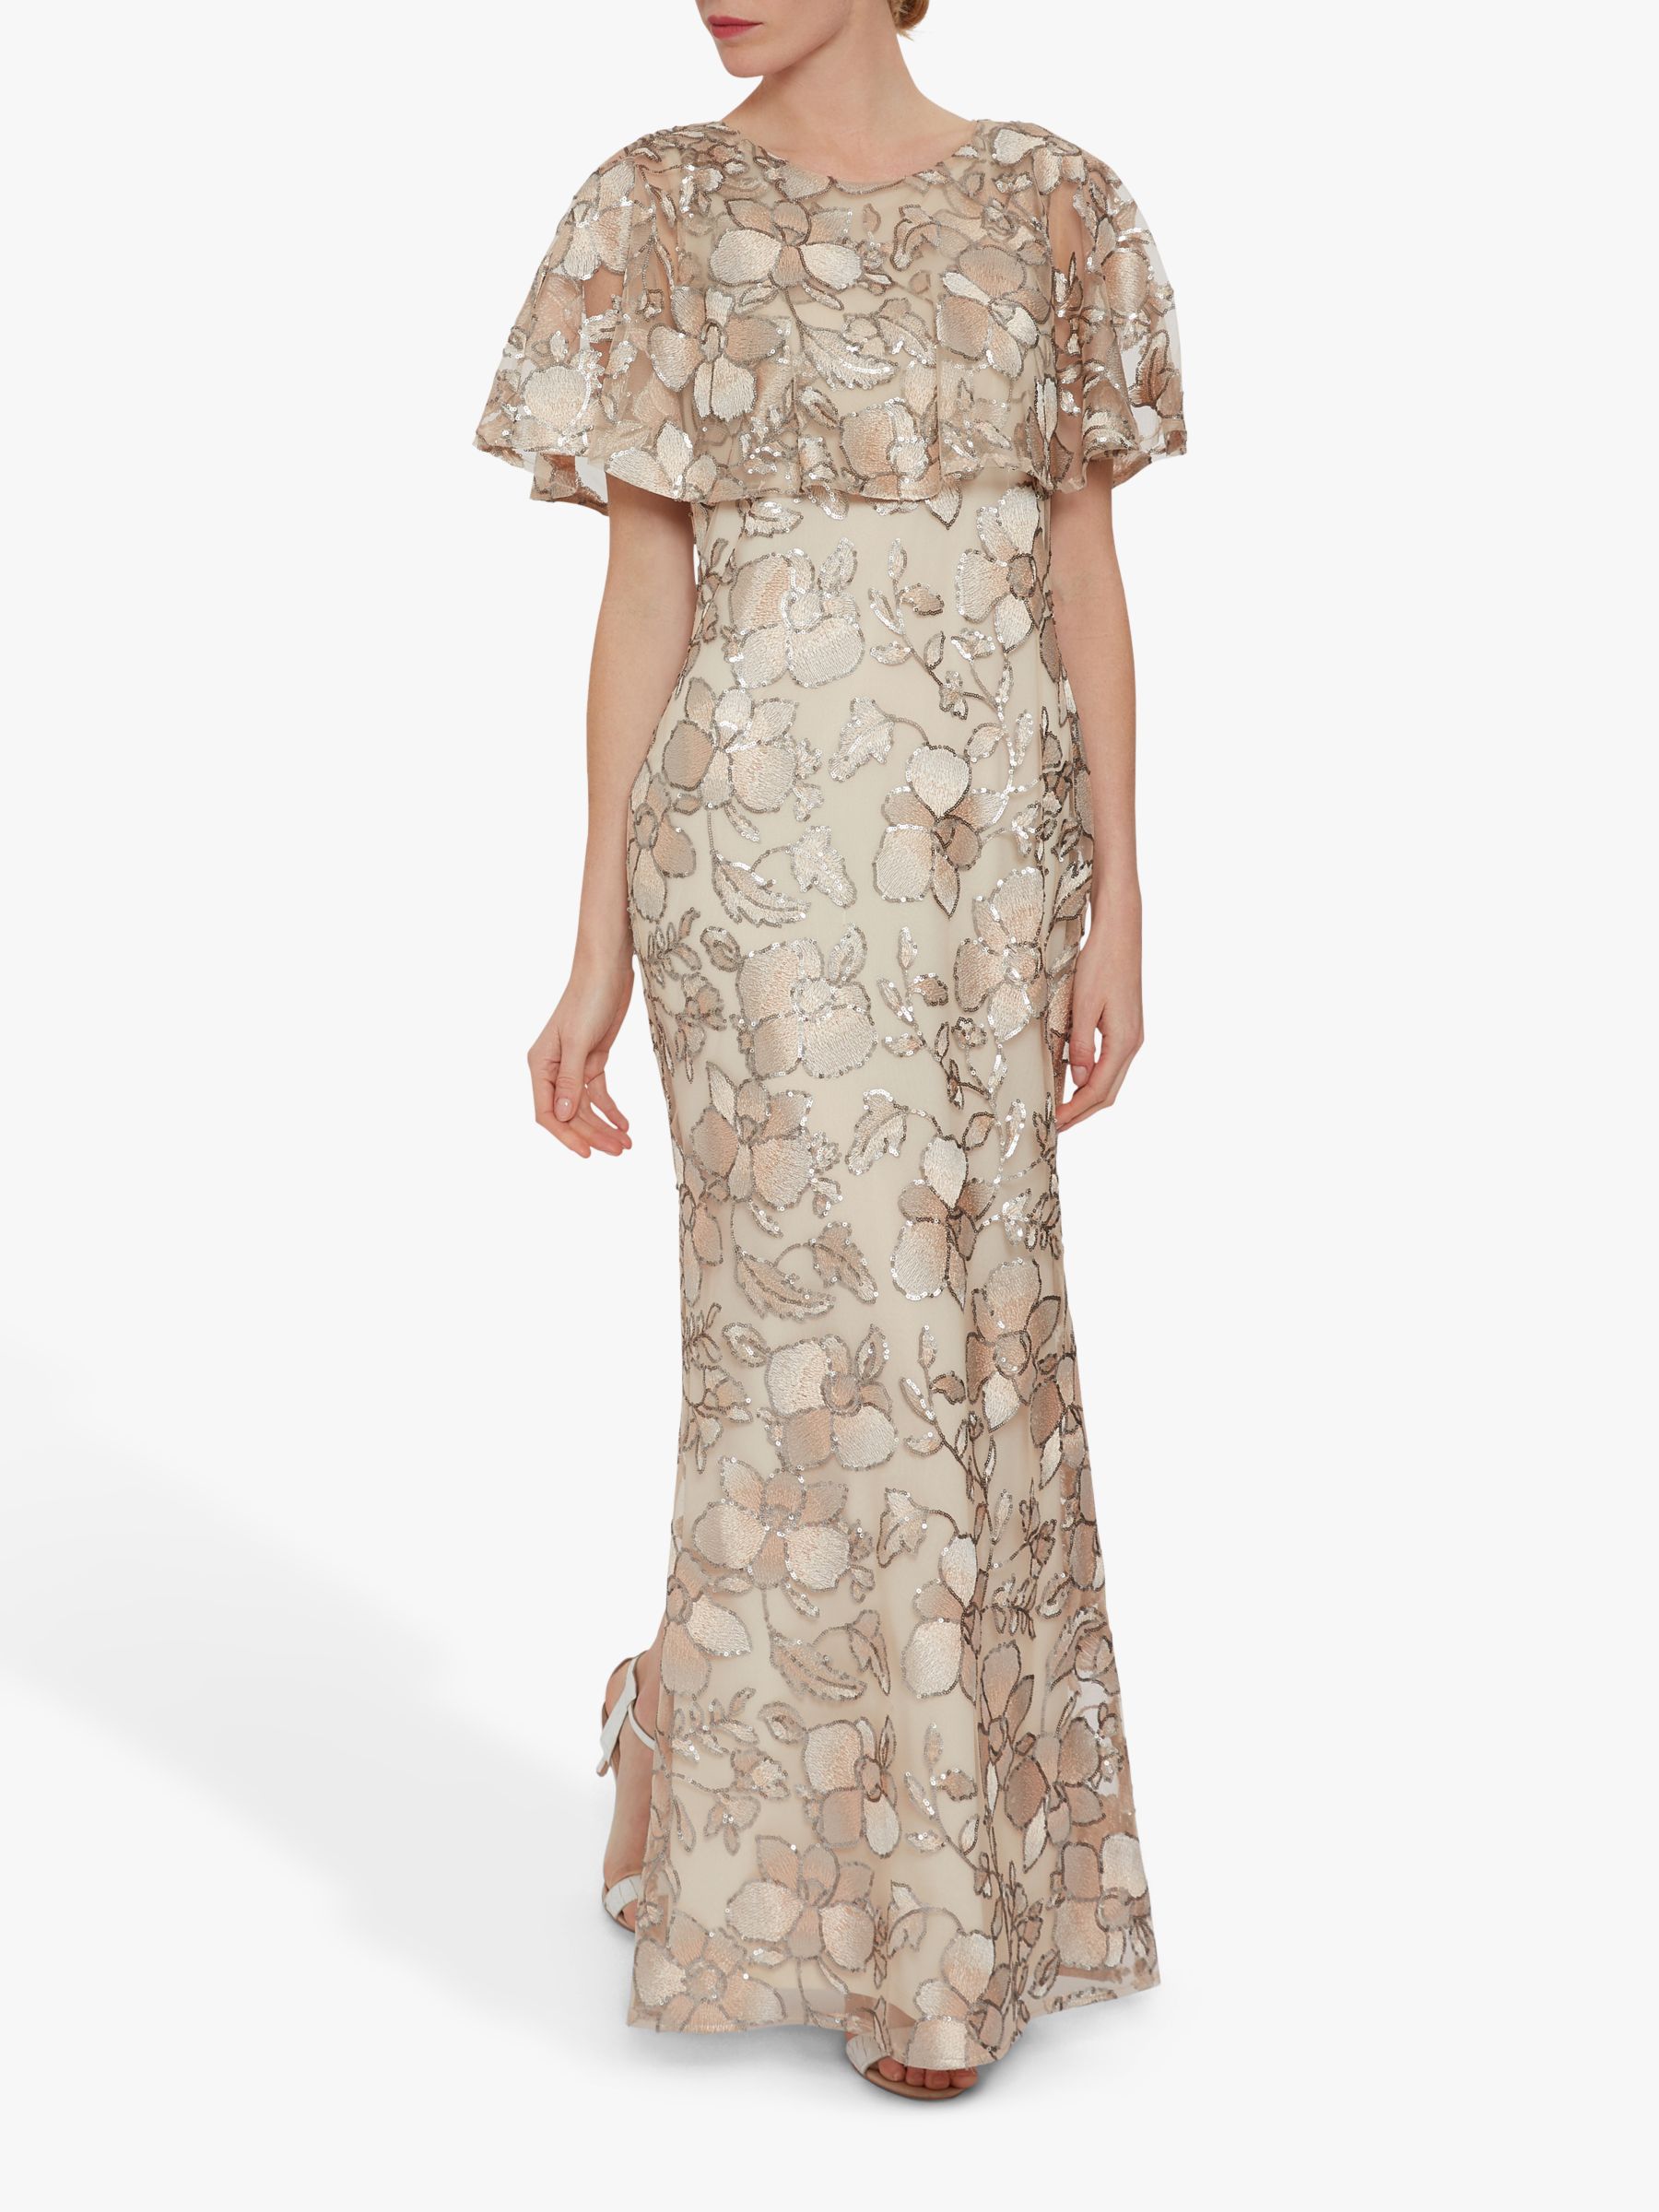 Gina Bacconi Darby Embroidered Maxi Dress, Beige at John Lewis & Partners